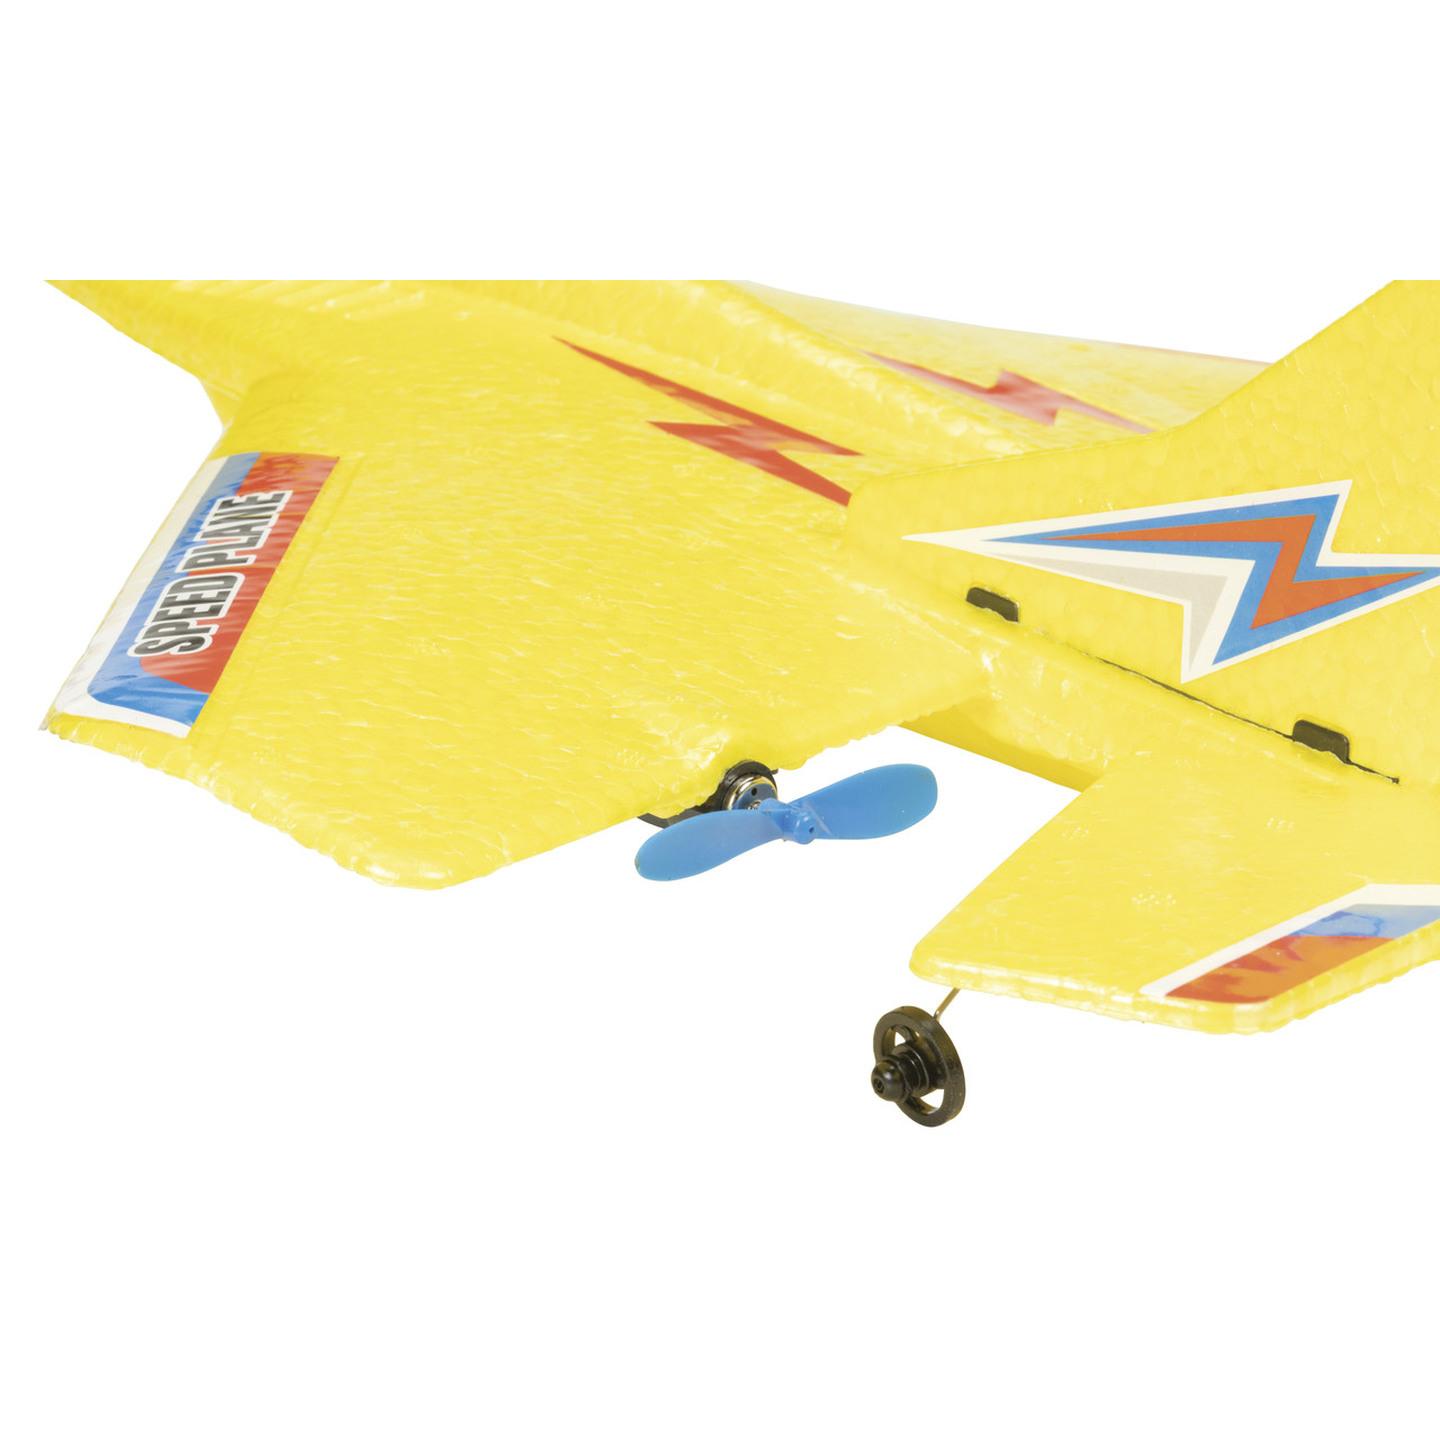 R/C Plane with LEDs